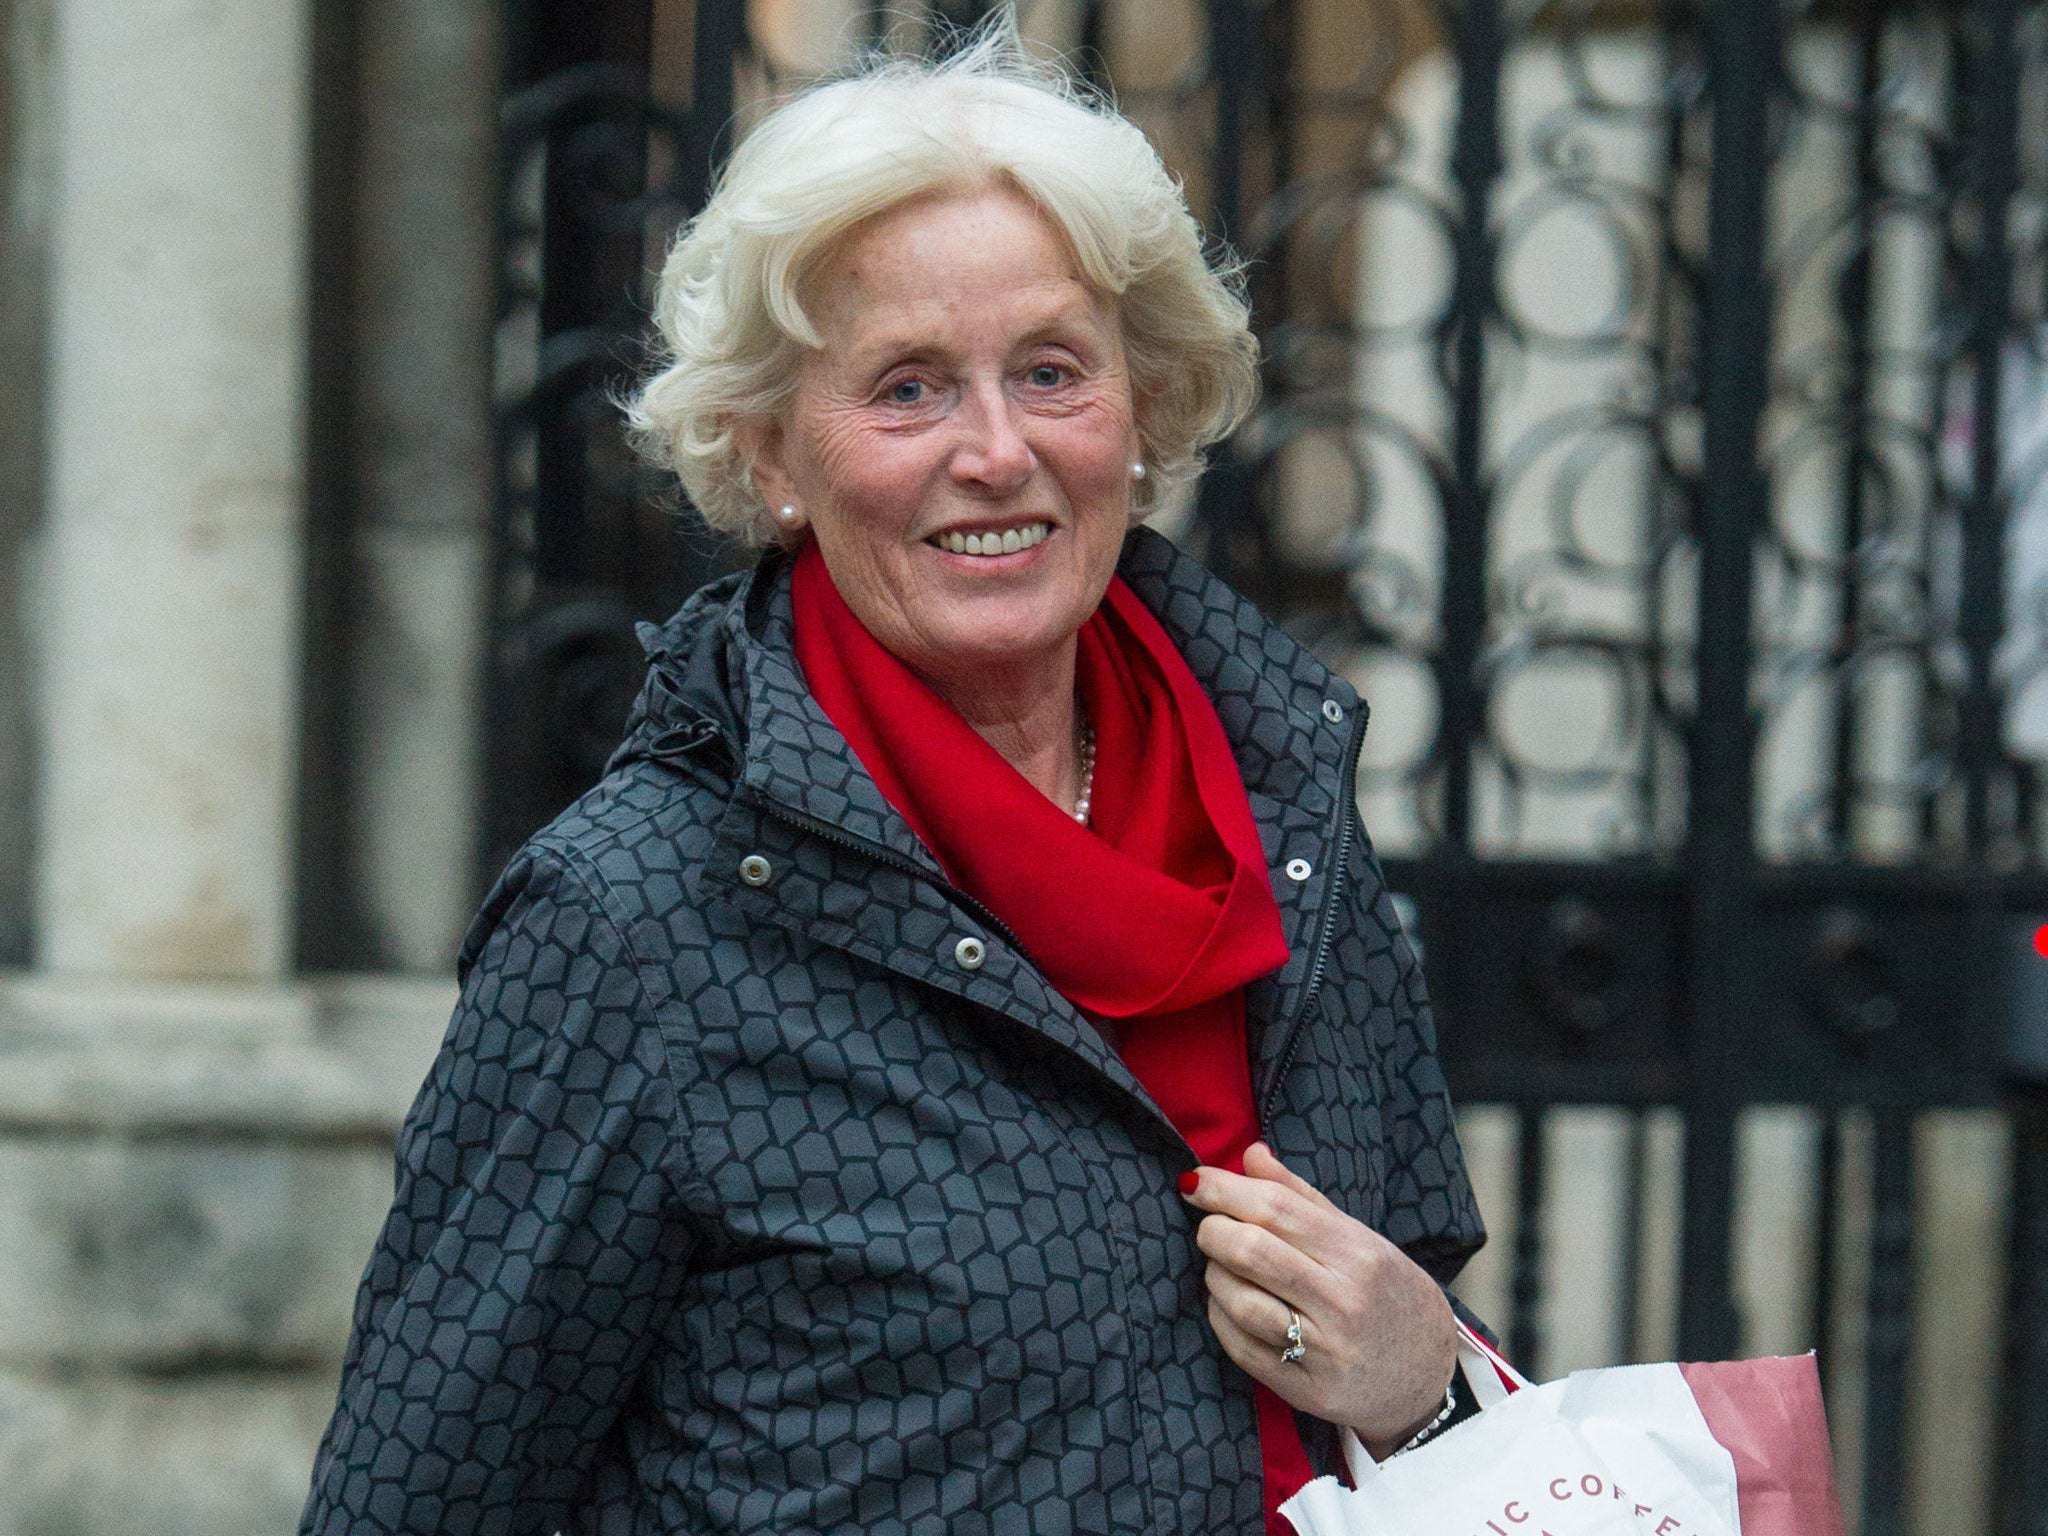 Ms Owens, 68, was granted permission to appeal in the case to divorce her husband, which was rejected by the High Court and Court of Appeal